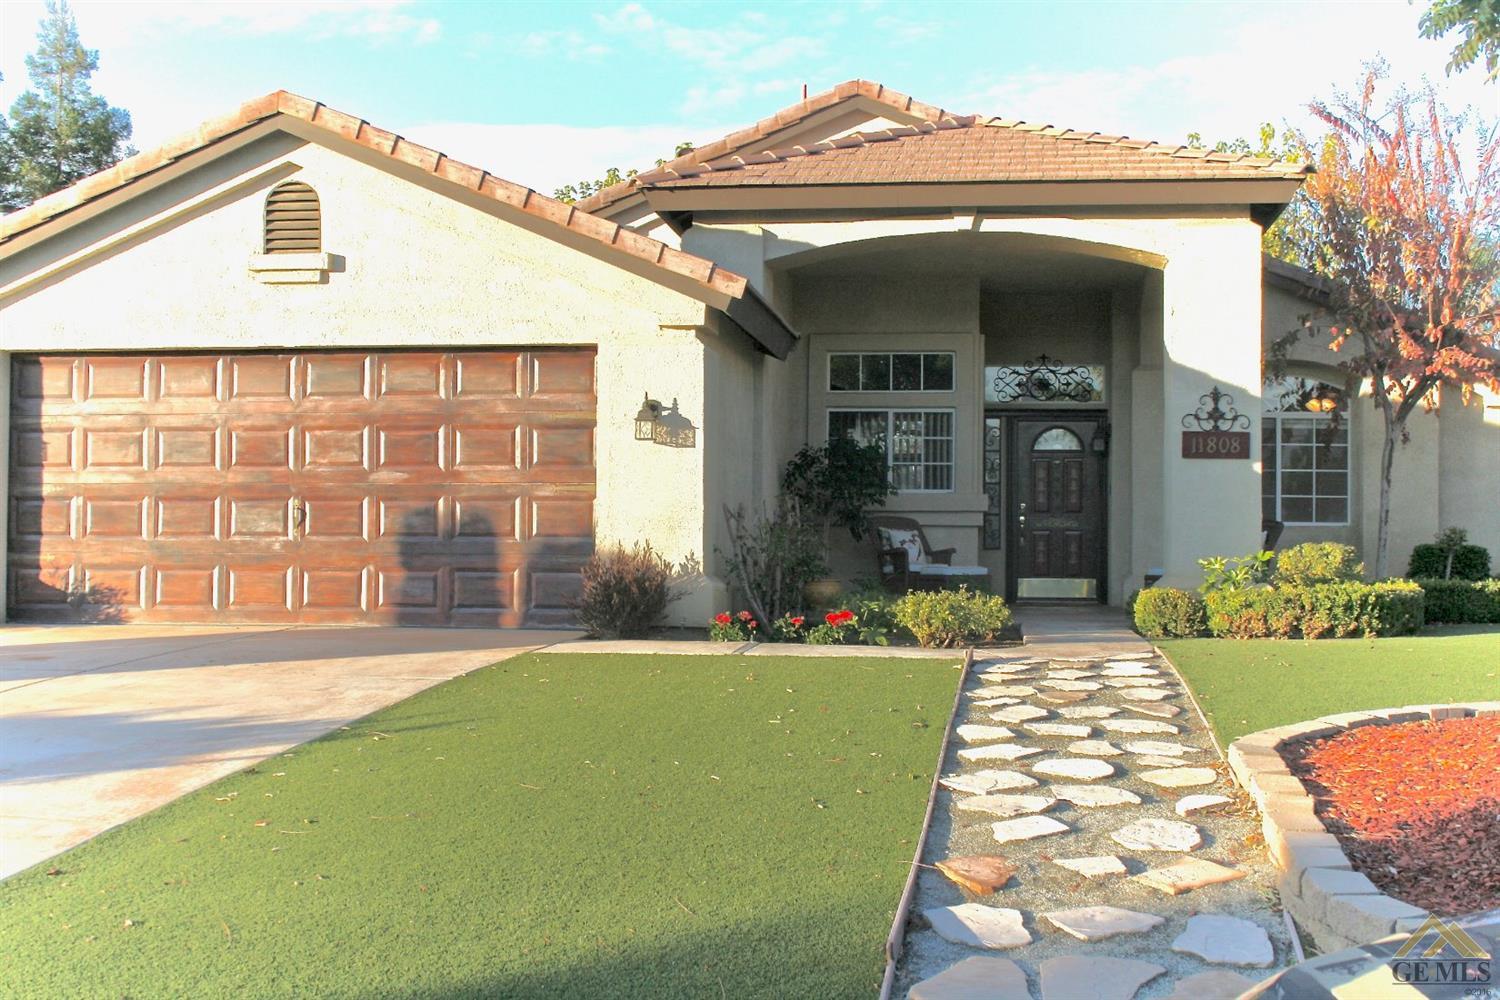 Faux painted garage door, stunning custom-painted front door and artificial turf gives this house the best curb appeal in the Villages of Brimhall!